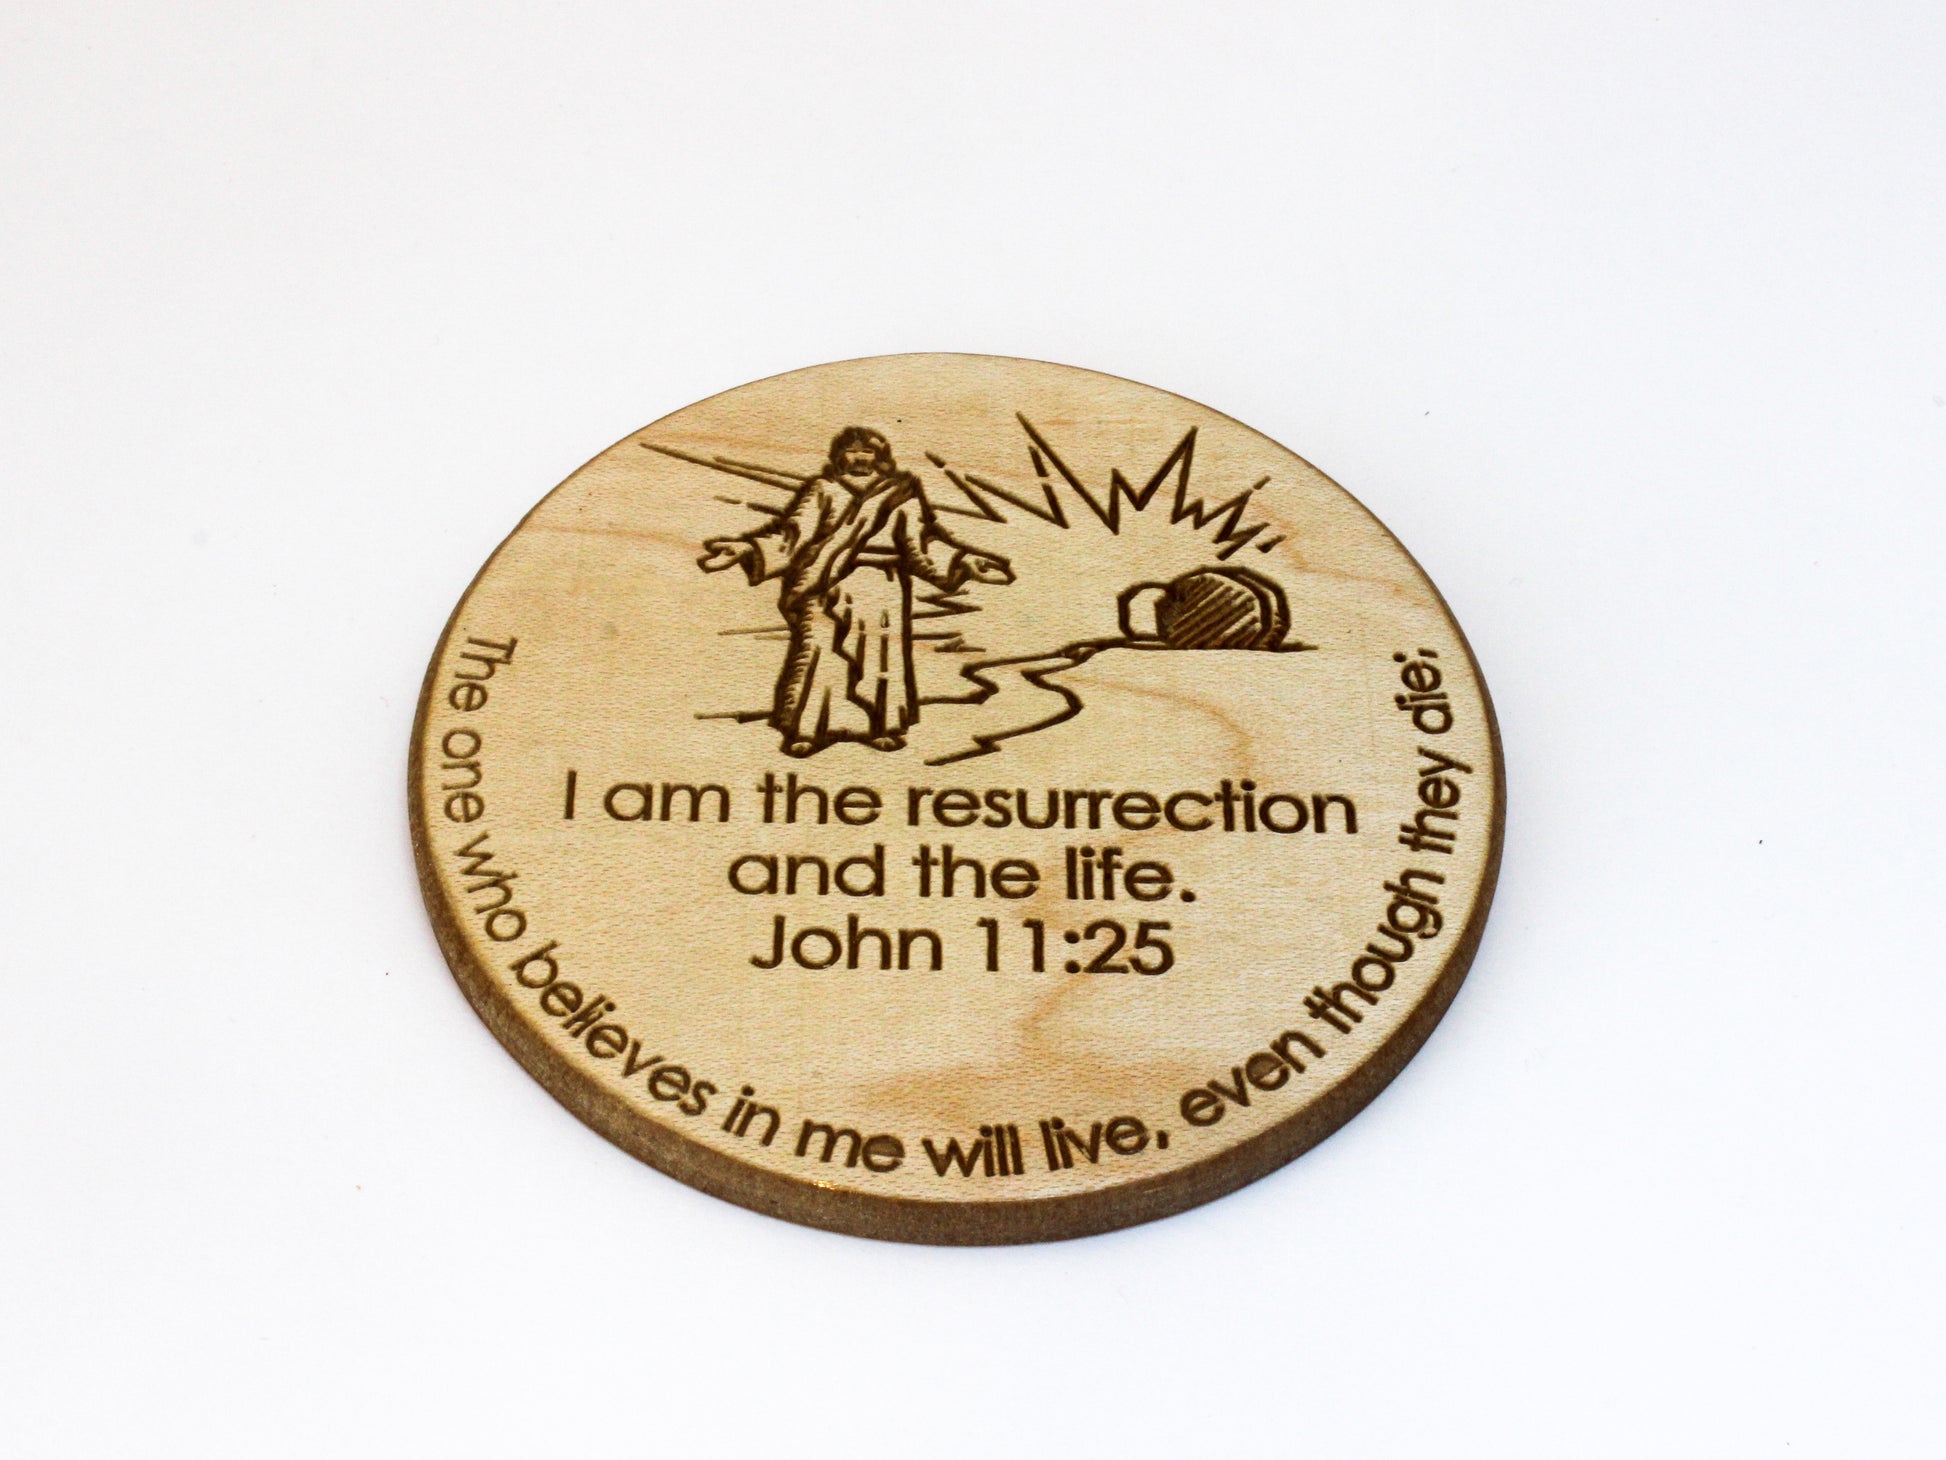 Wooden coaster featuring an image of the risen Christ and the text of John 11:25: "I am the resurrection and the life. The one who believes in me will live, even though they die."